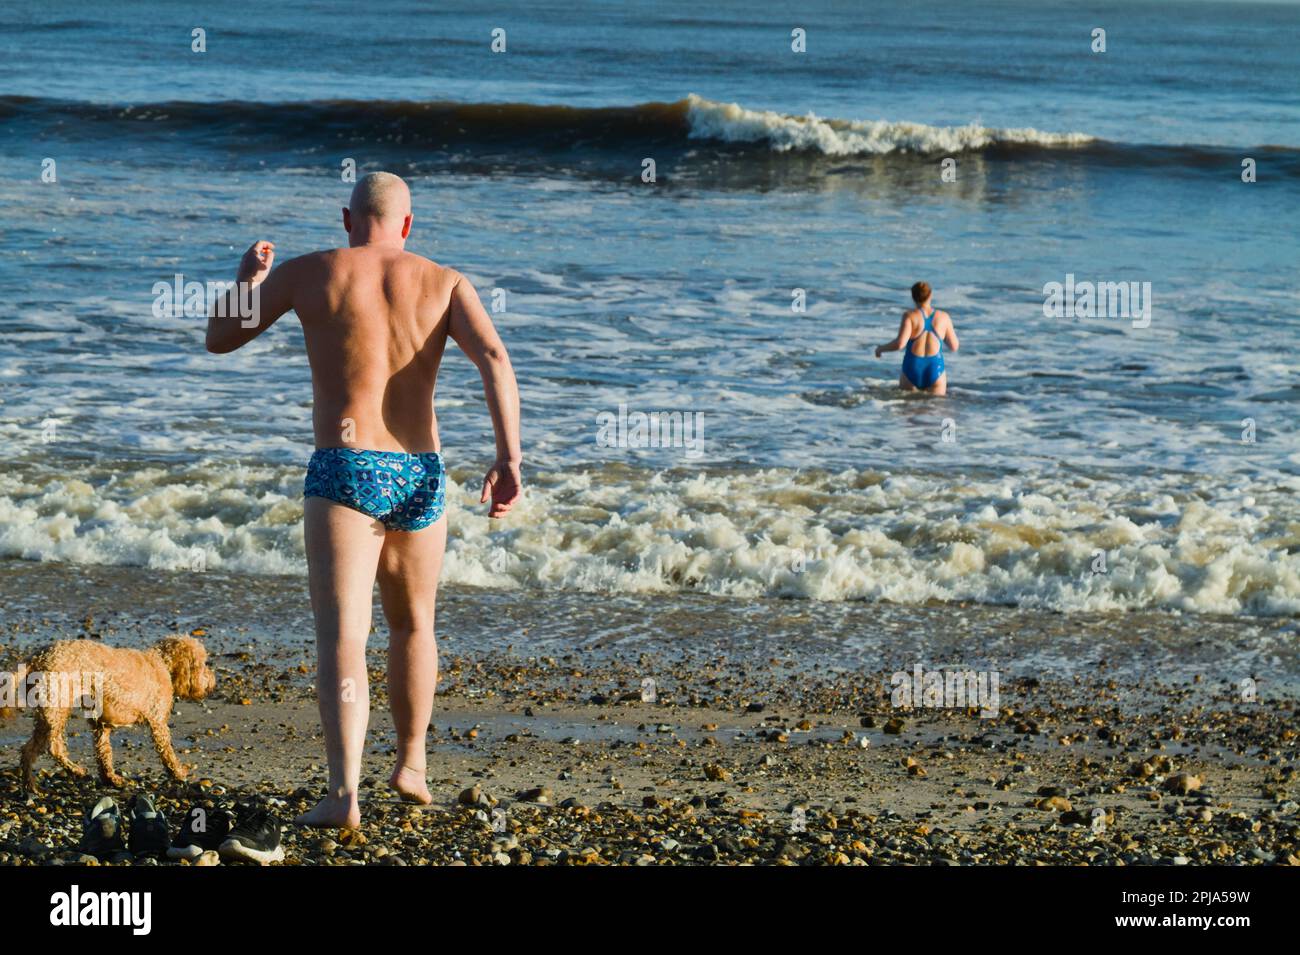 Man In Trunks Running Into The Sea With Dog On Avon Beach Christchurch, UK In Winter Stock Photo